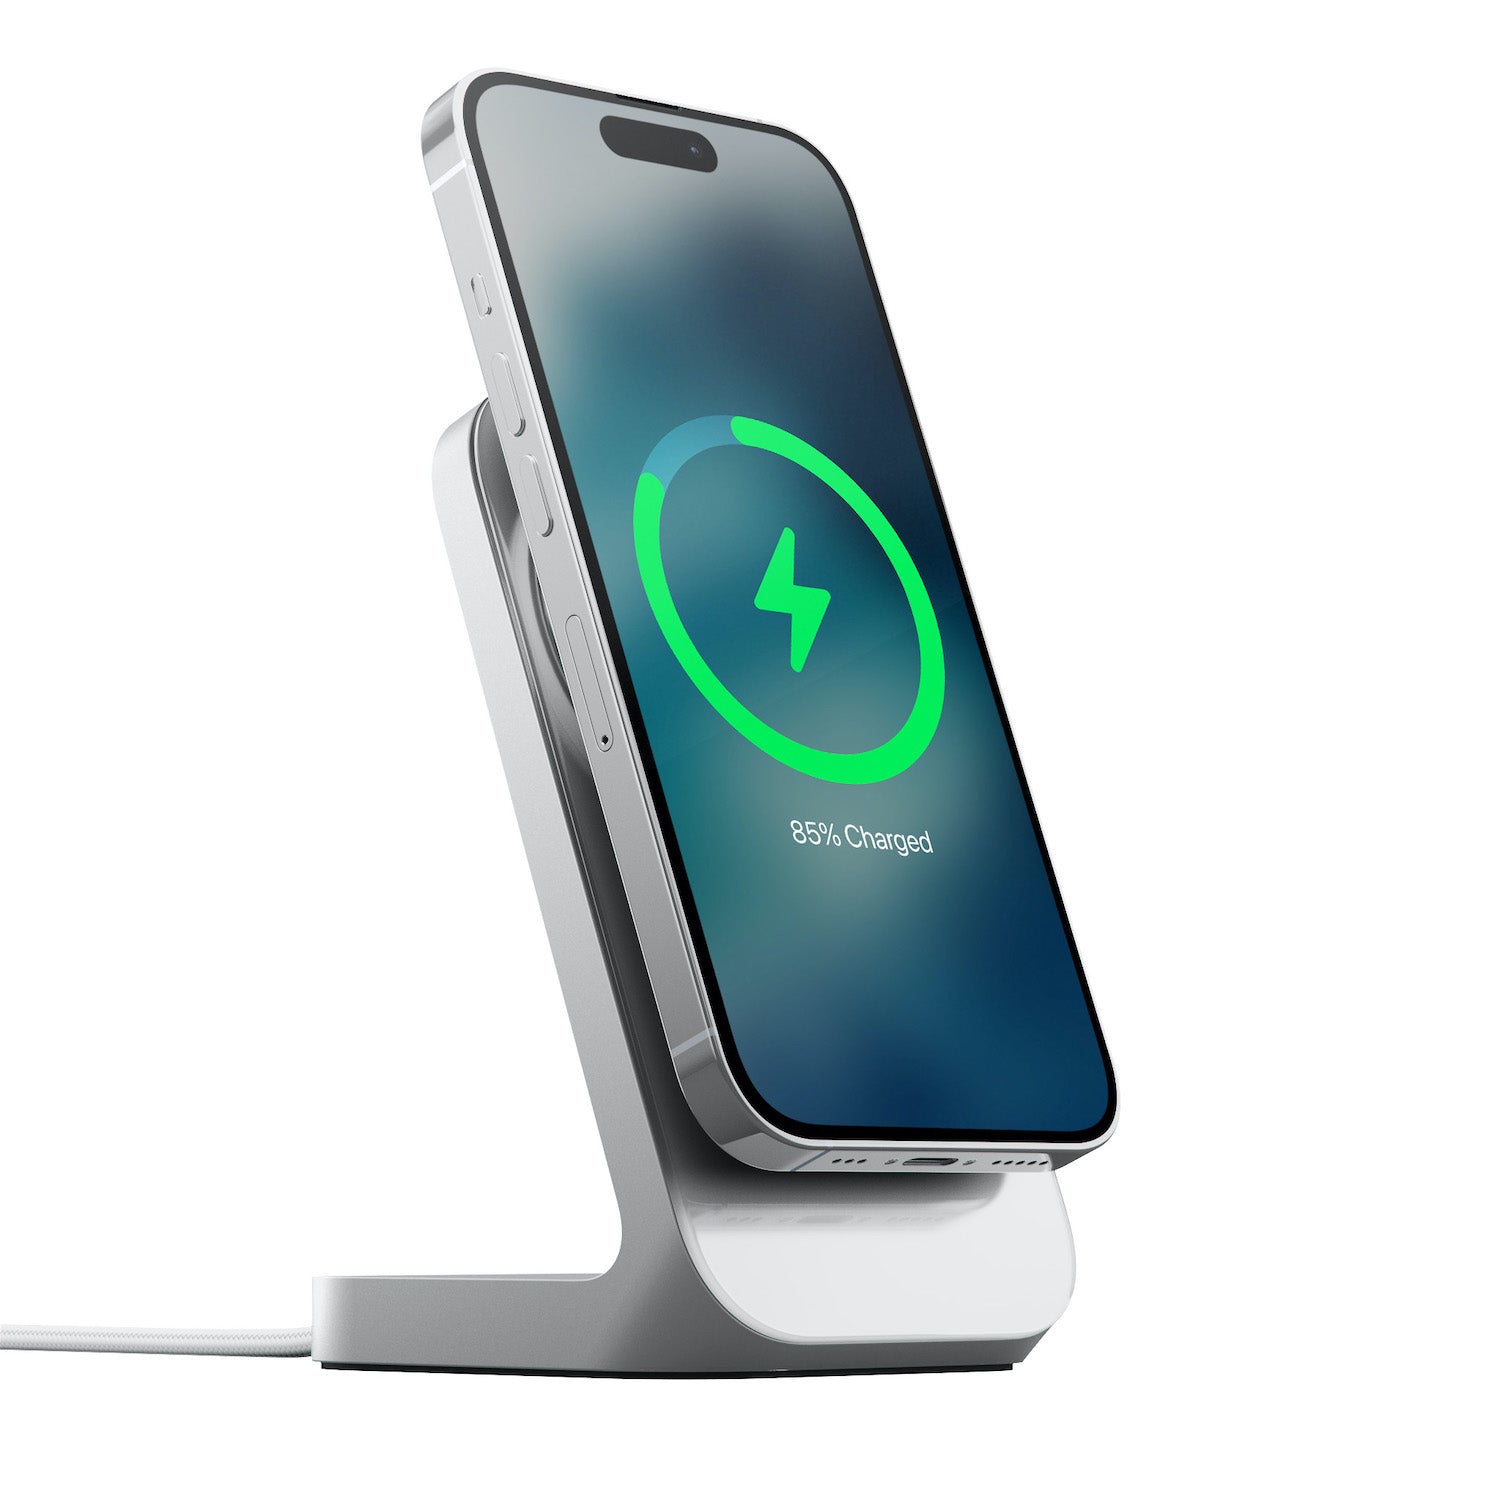 Stand One - MagSafe Wireless Charger - Silver